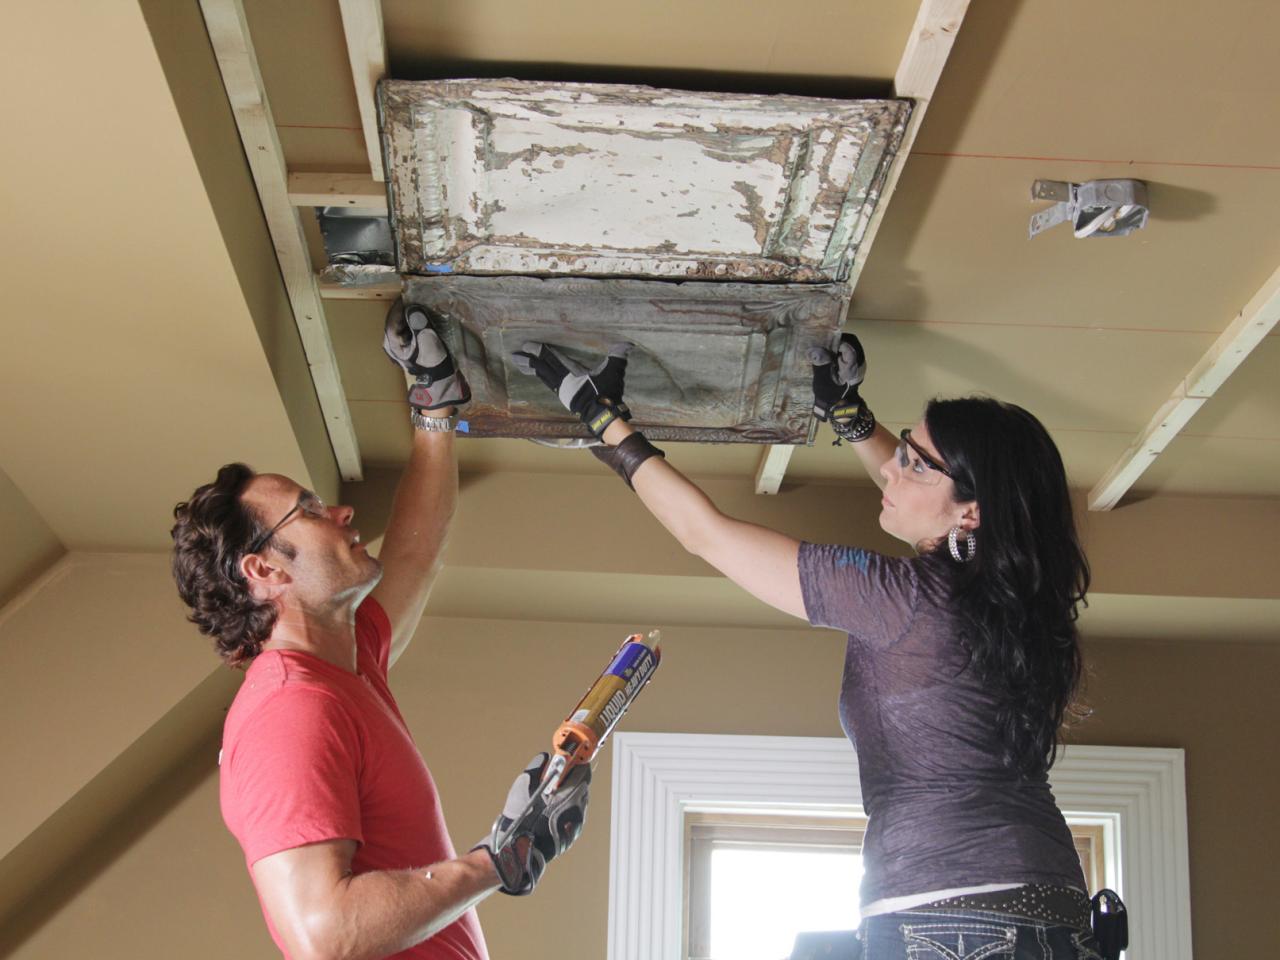 How To Install A Stamped Tin Ceiling, How To Install Tin Ceiling Tiles In Basement